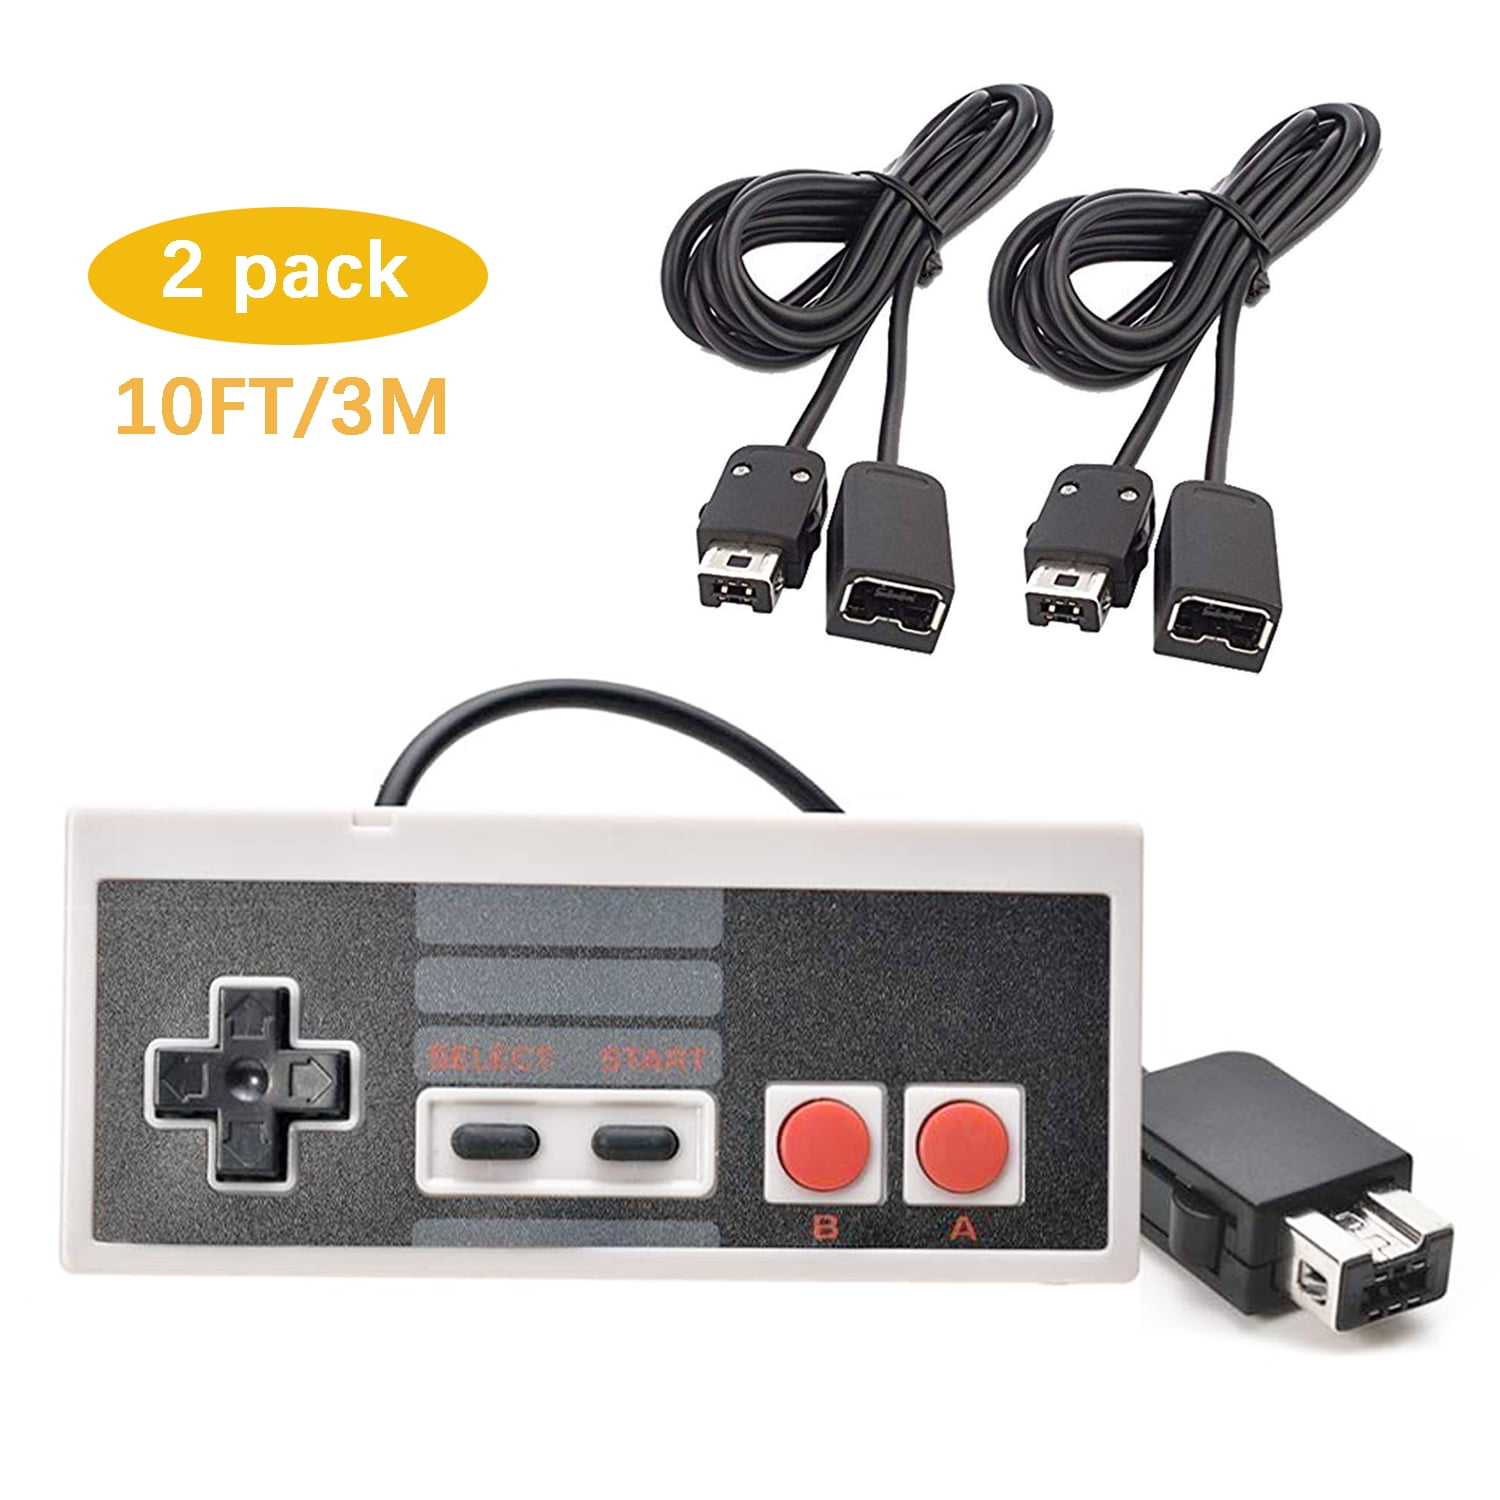 BRAND NEW Retro 8 Nes Classic Controller Extension Cable Accessories 